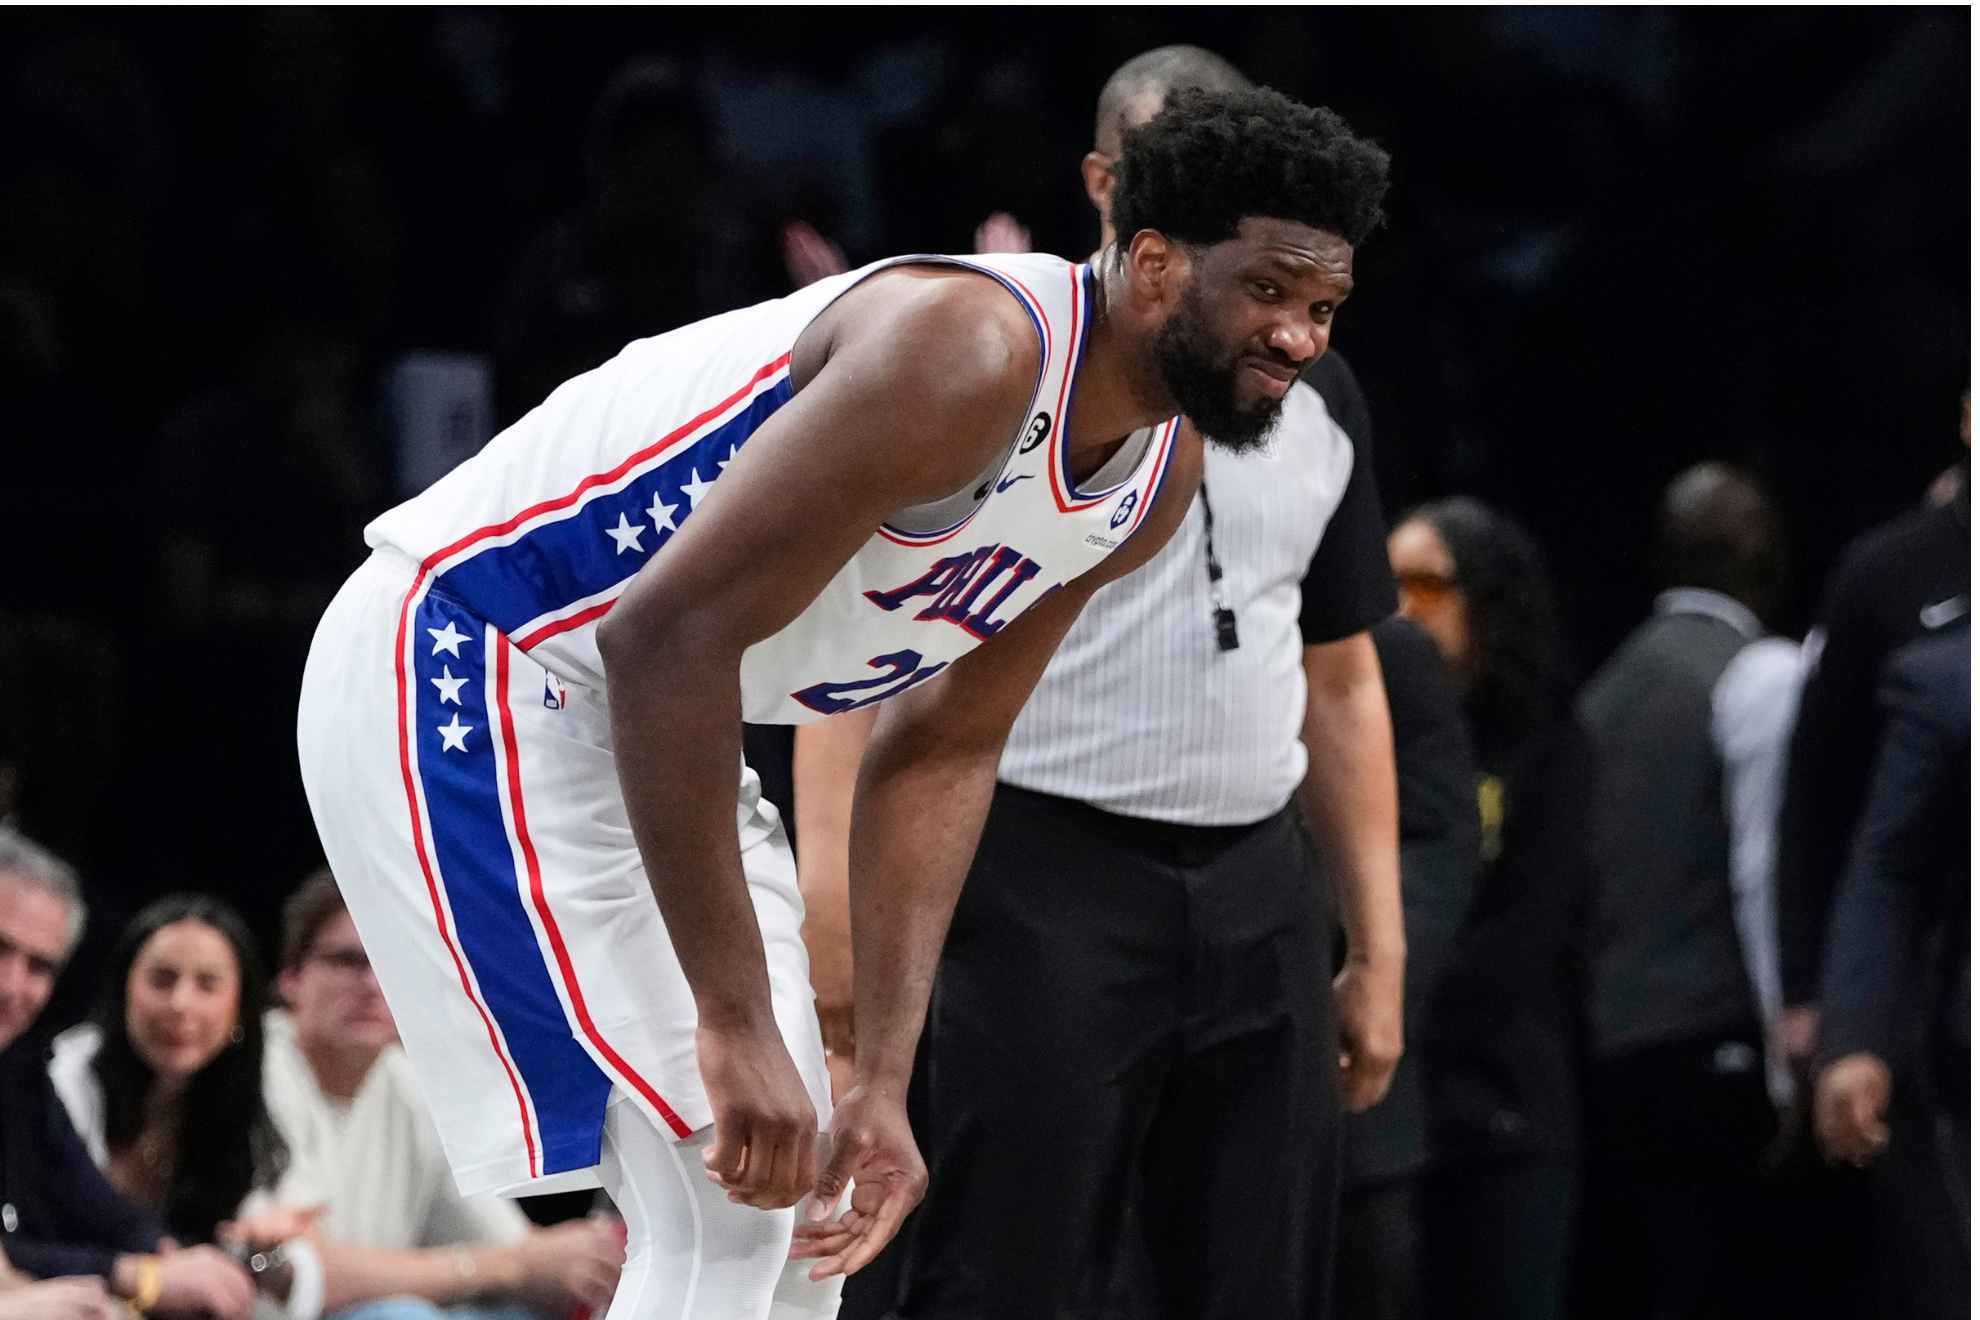 Joel Embiid scored 14 points and added 10 rebounds in the 76ers' win Thursday.